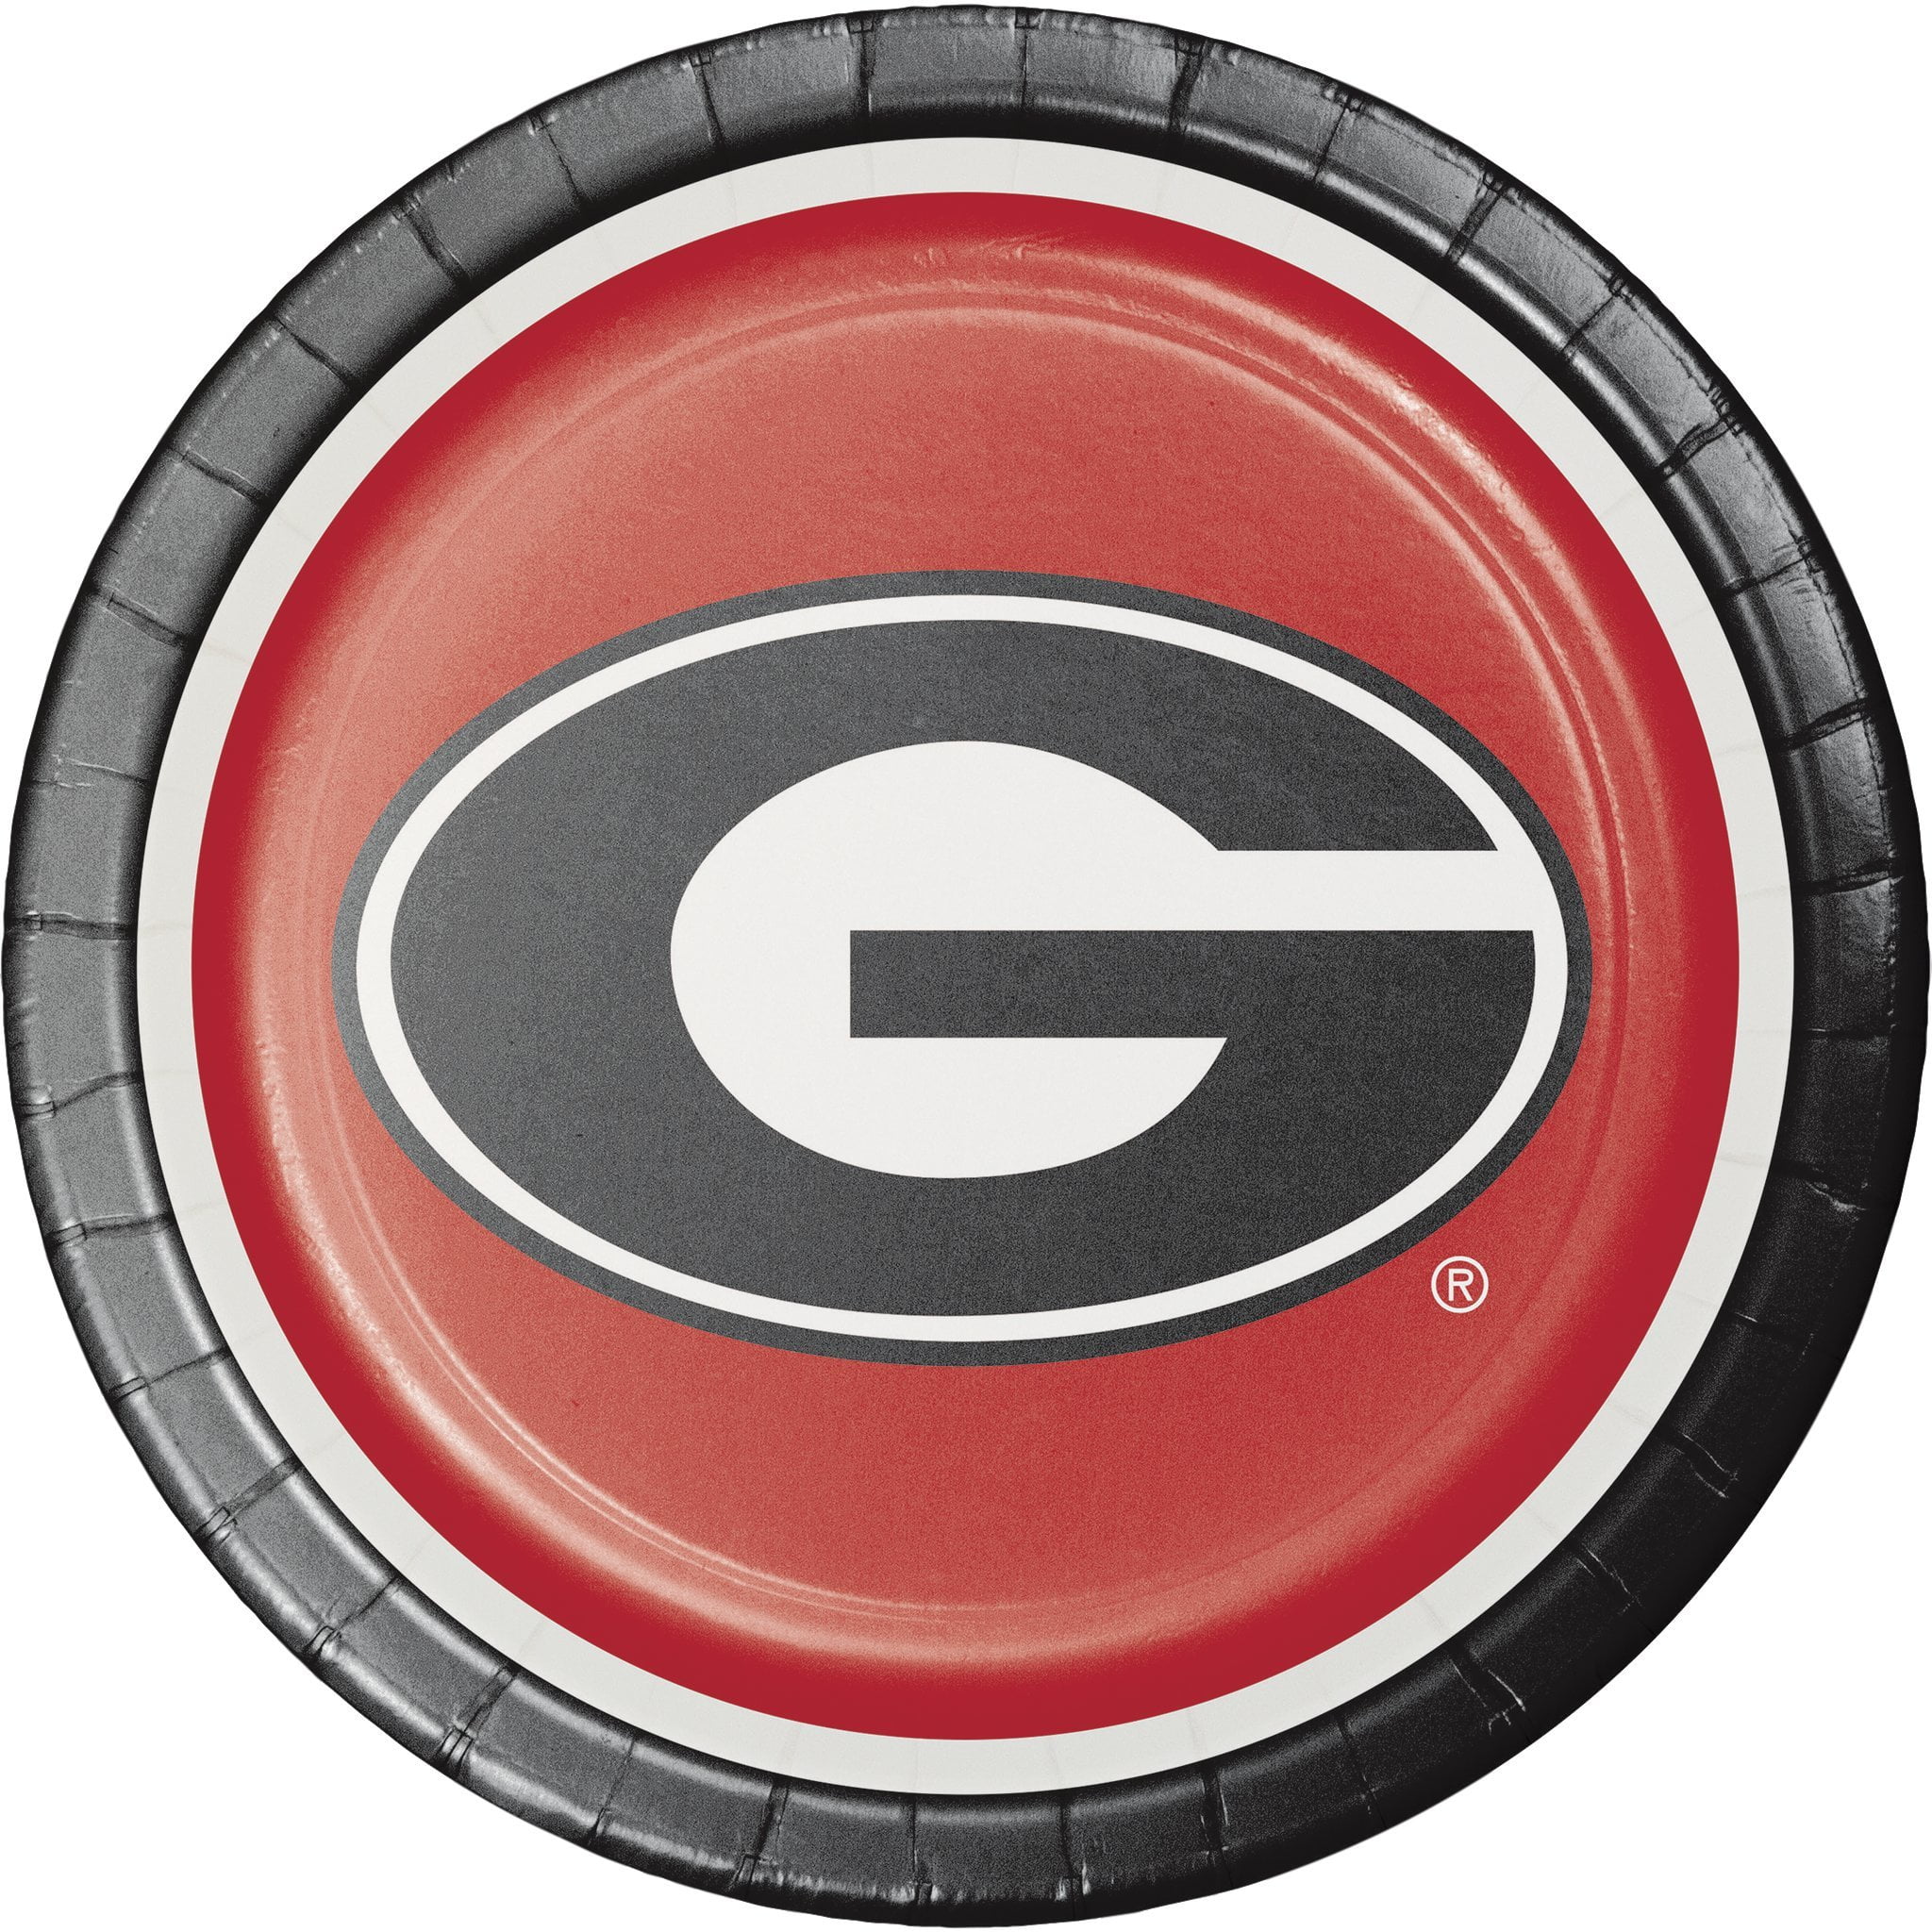 University of Georgia Bulldogs Party Supply Pack Bundle Includes Plates Napkins & Cups for 8 Guests 